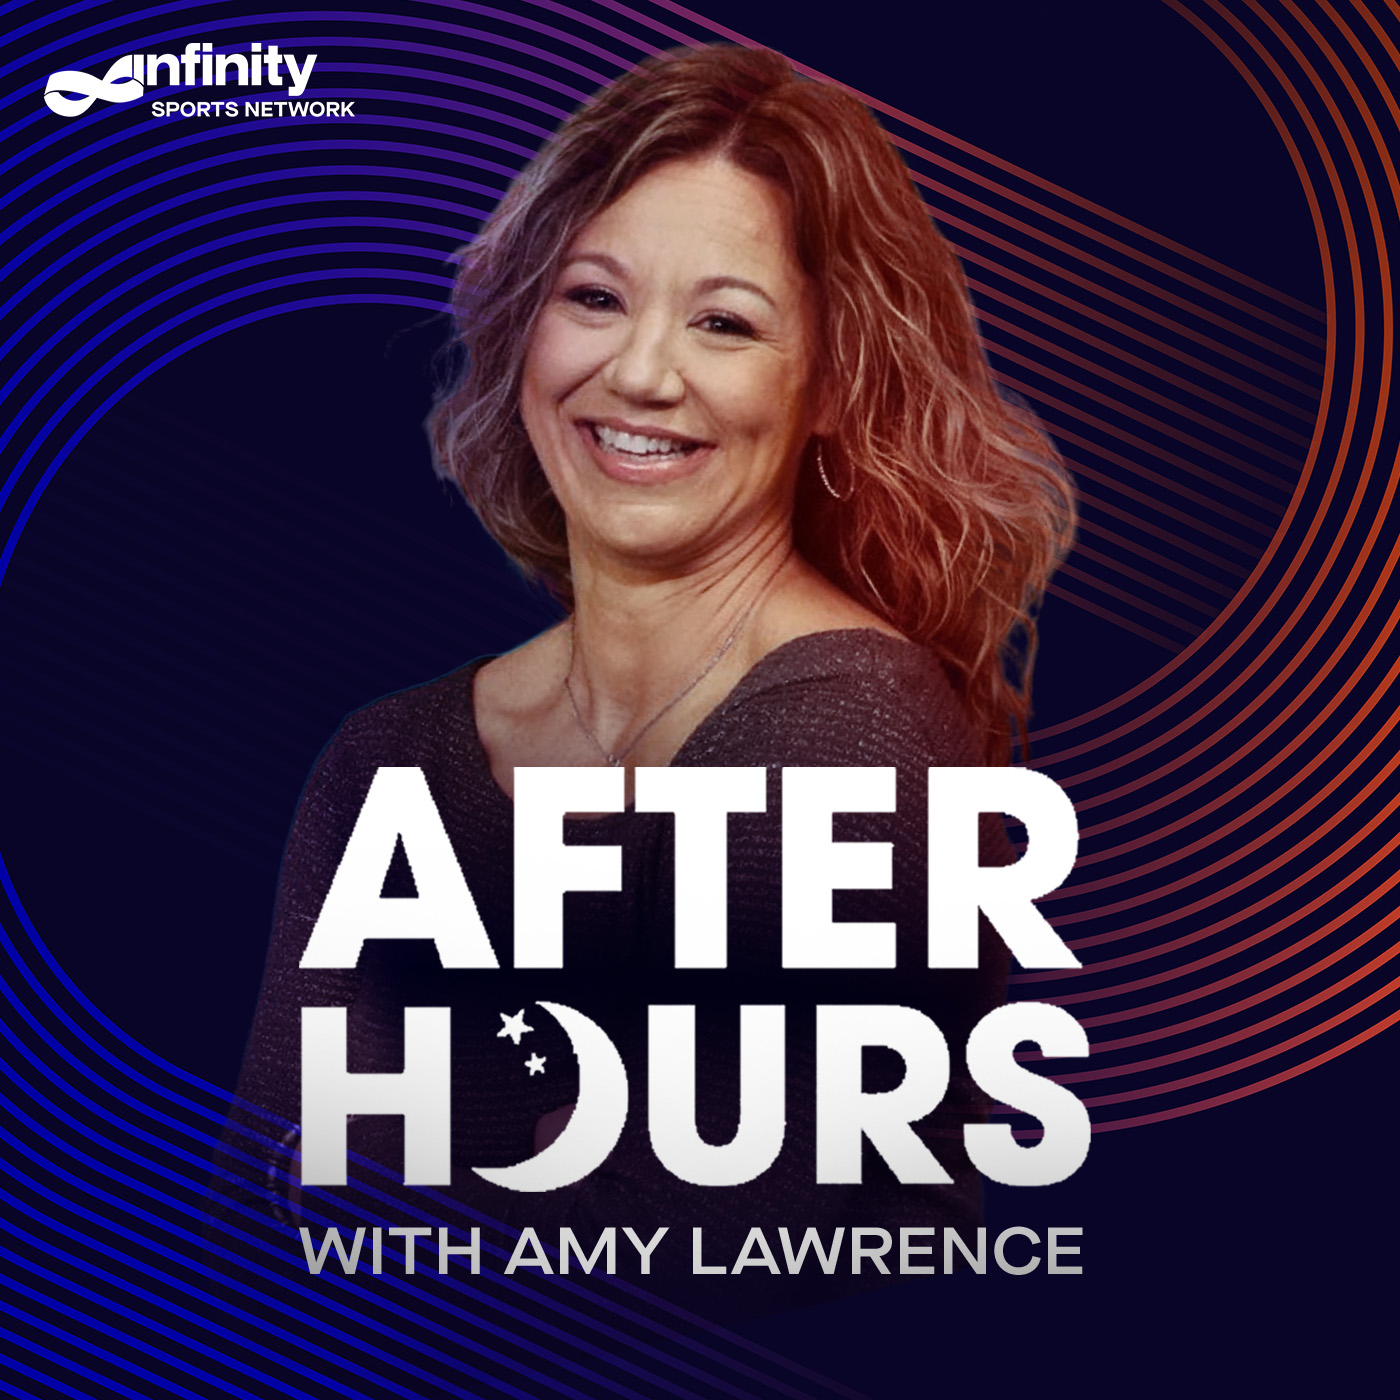 11-9-21 After Hours with Amy Lawrence PODCAST: Hour 4